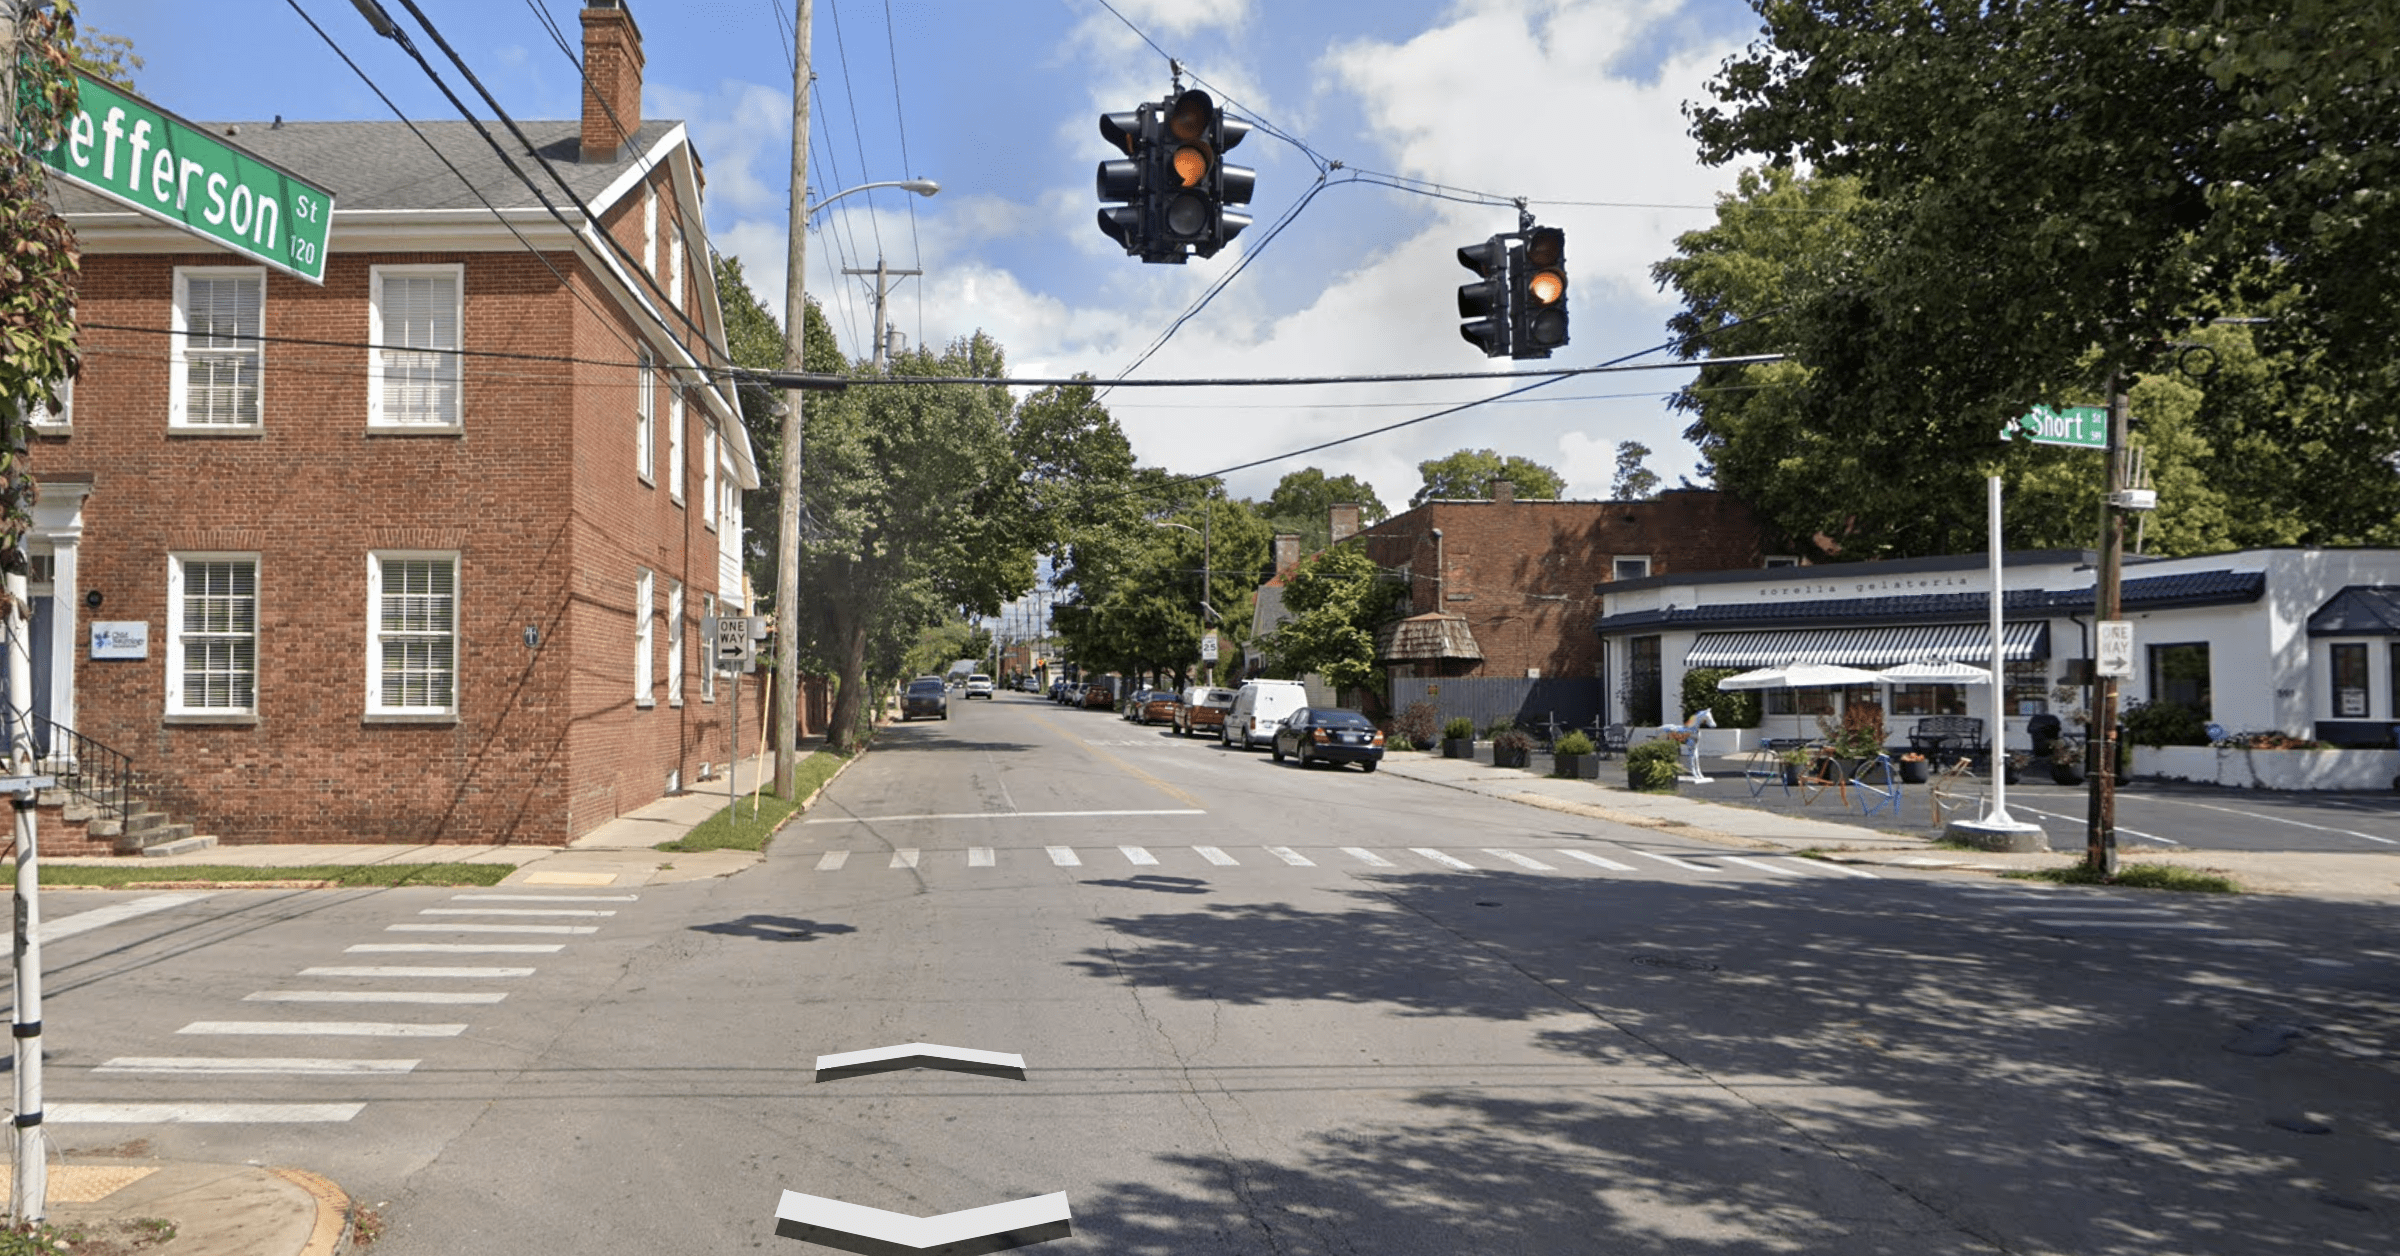 Lexington's Traffic Engineering Division to Remove Traffic Signal at Short & Jefferson